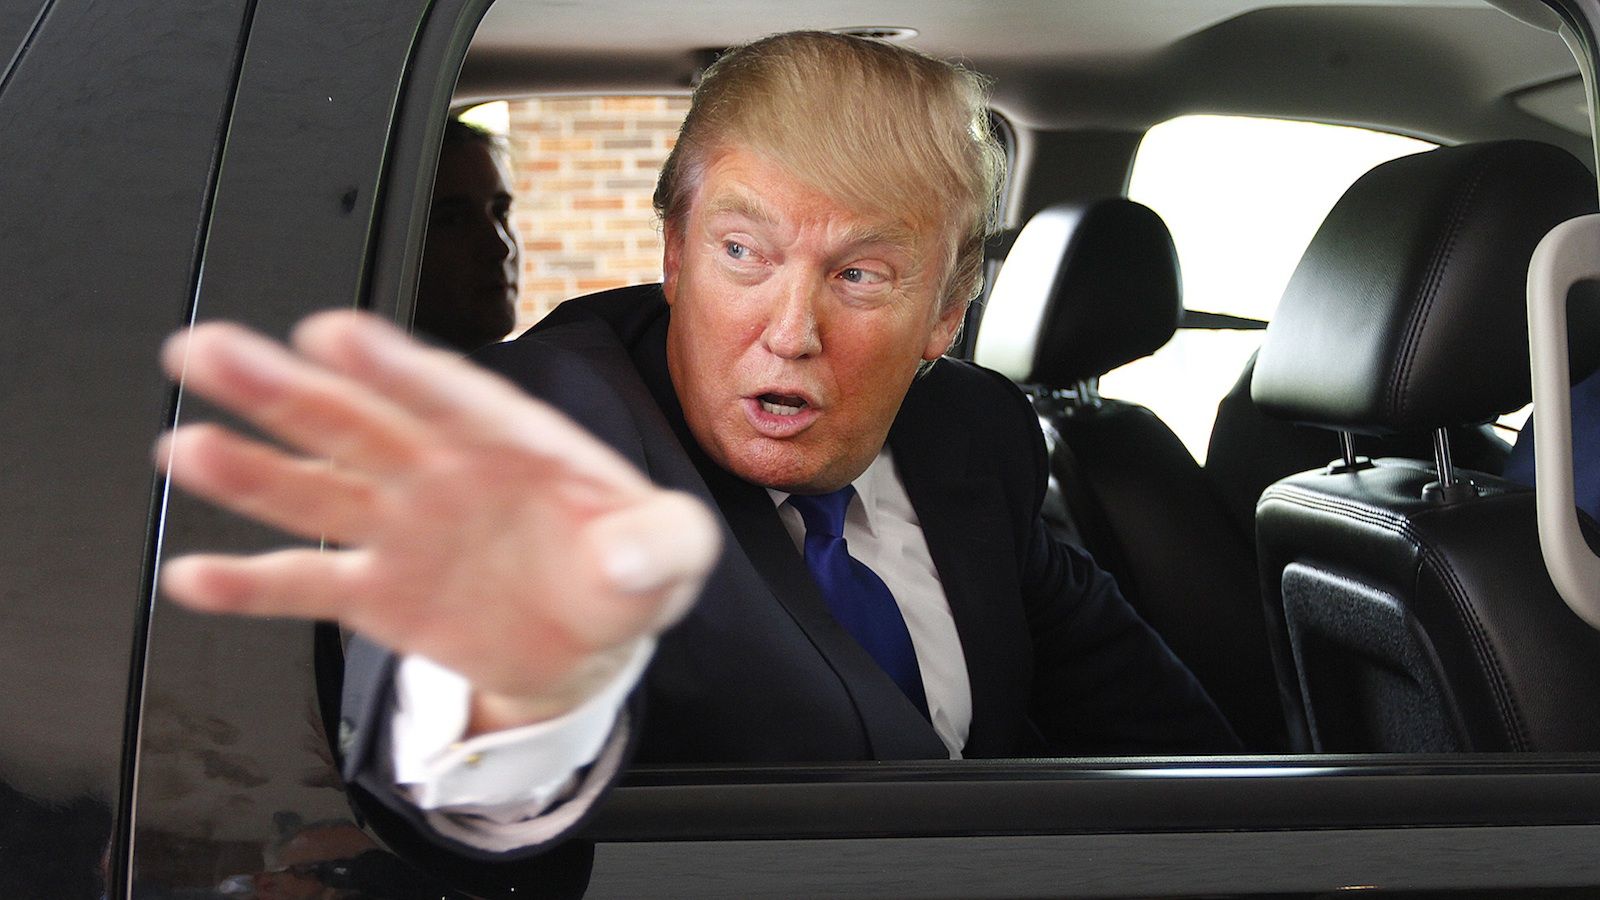 Trump waves off questions from car